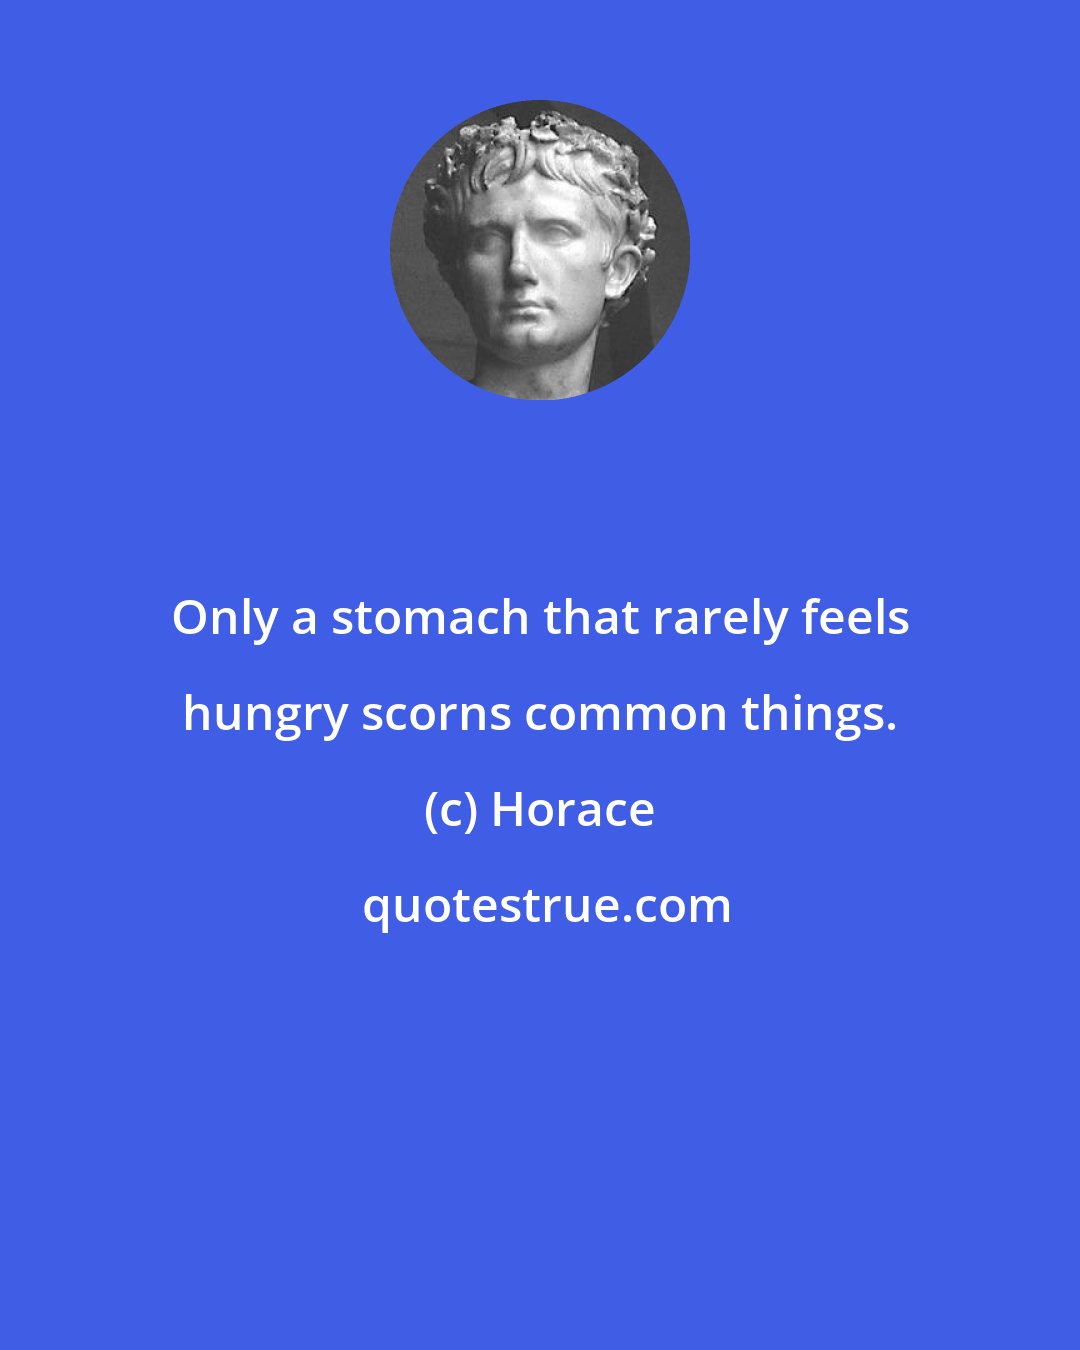 Horace: Only a stomach that rarely feels hungry scorns common things.